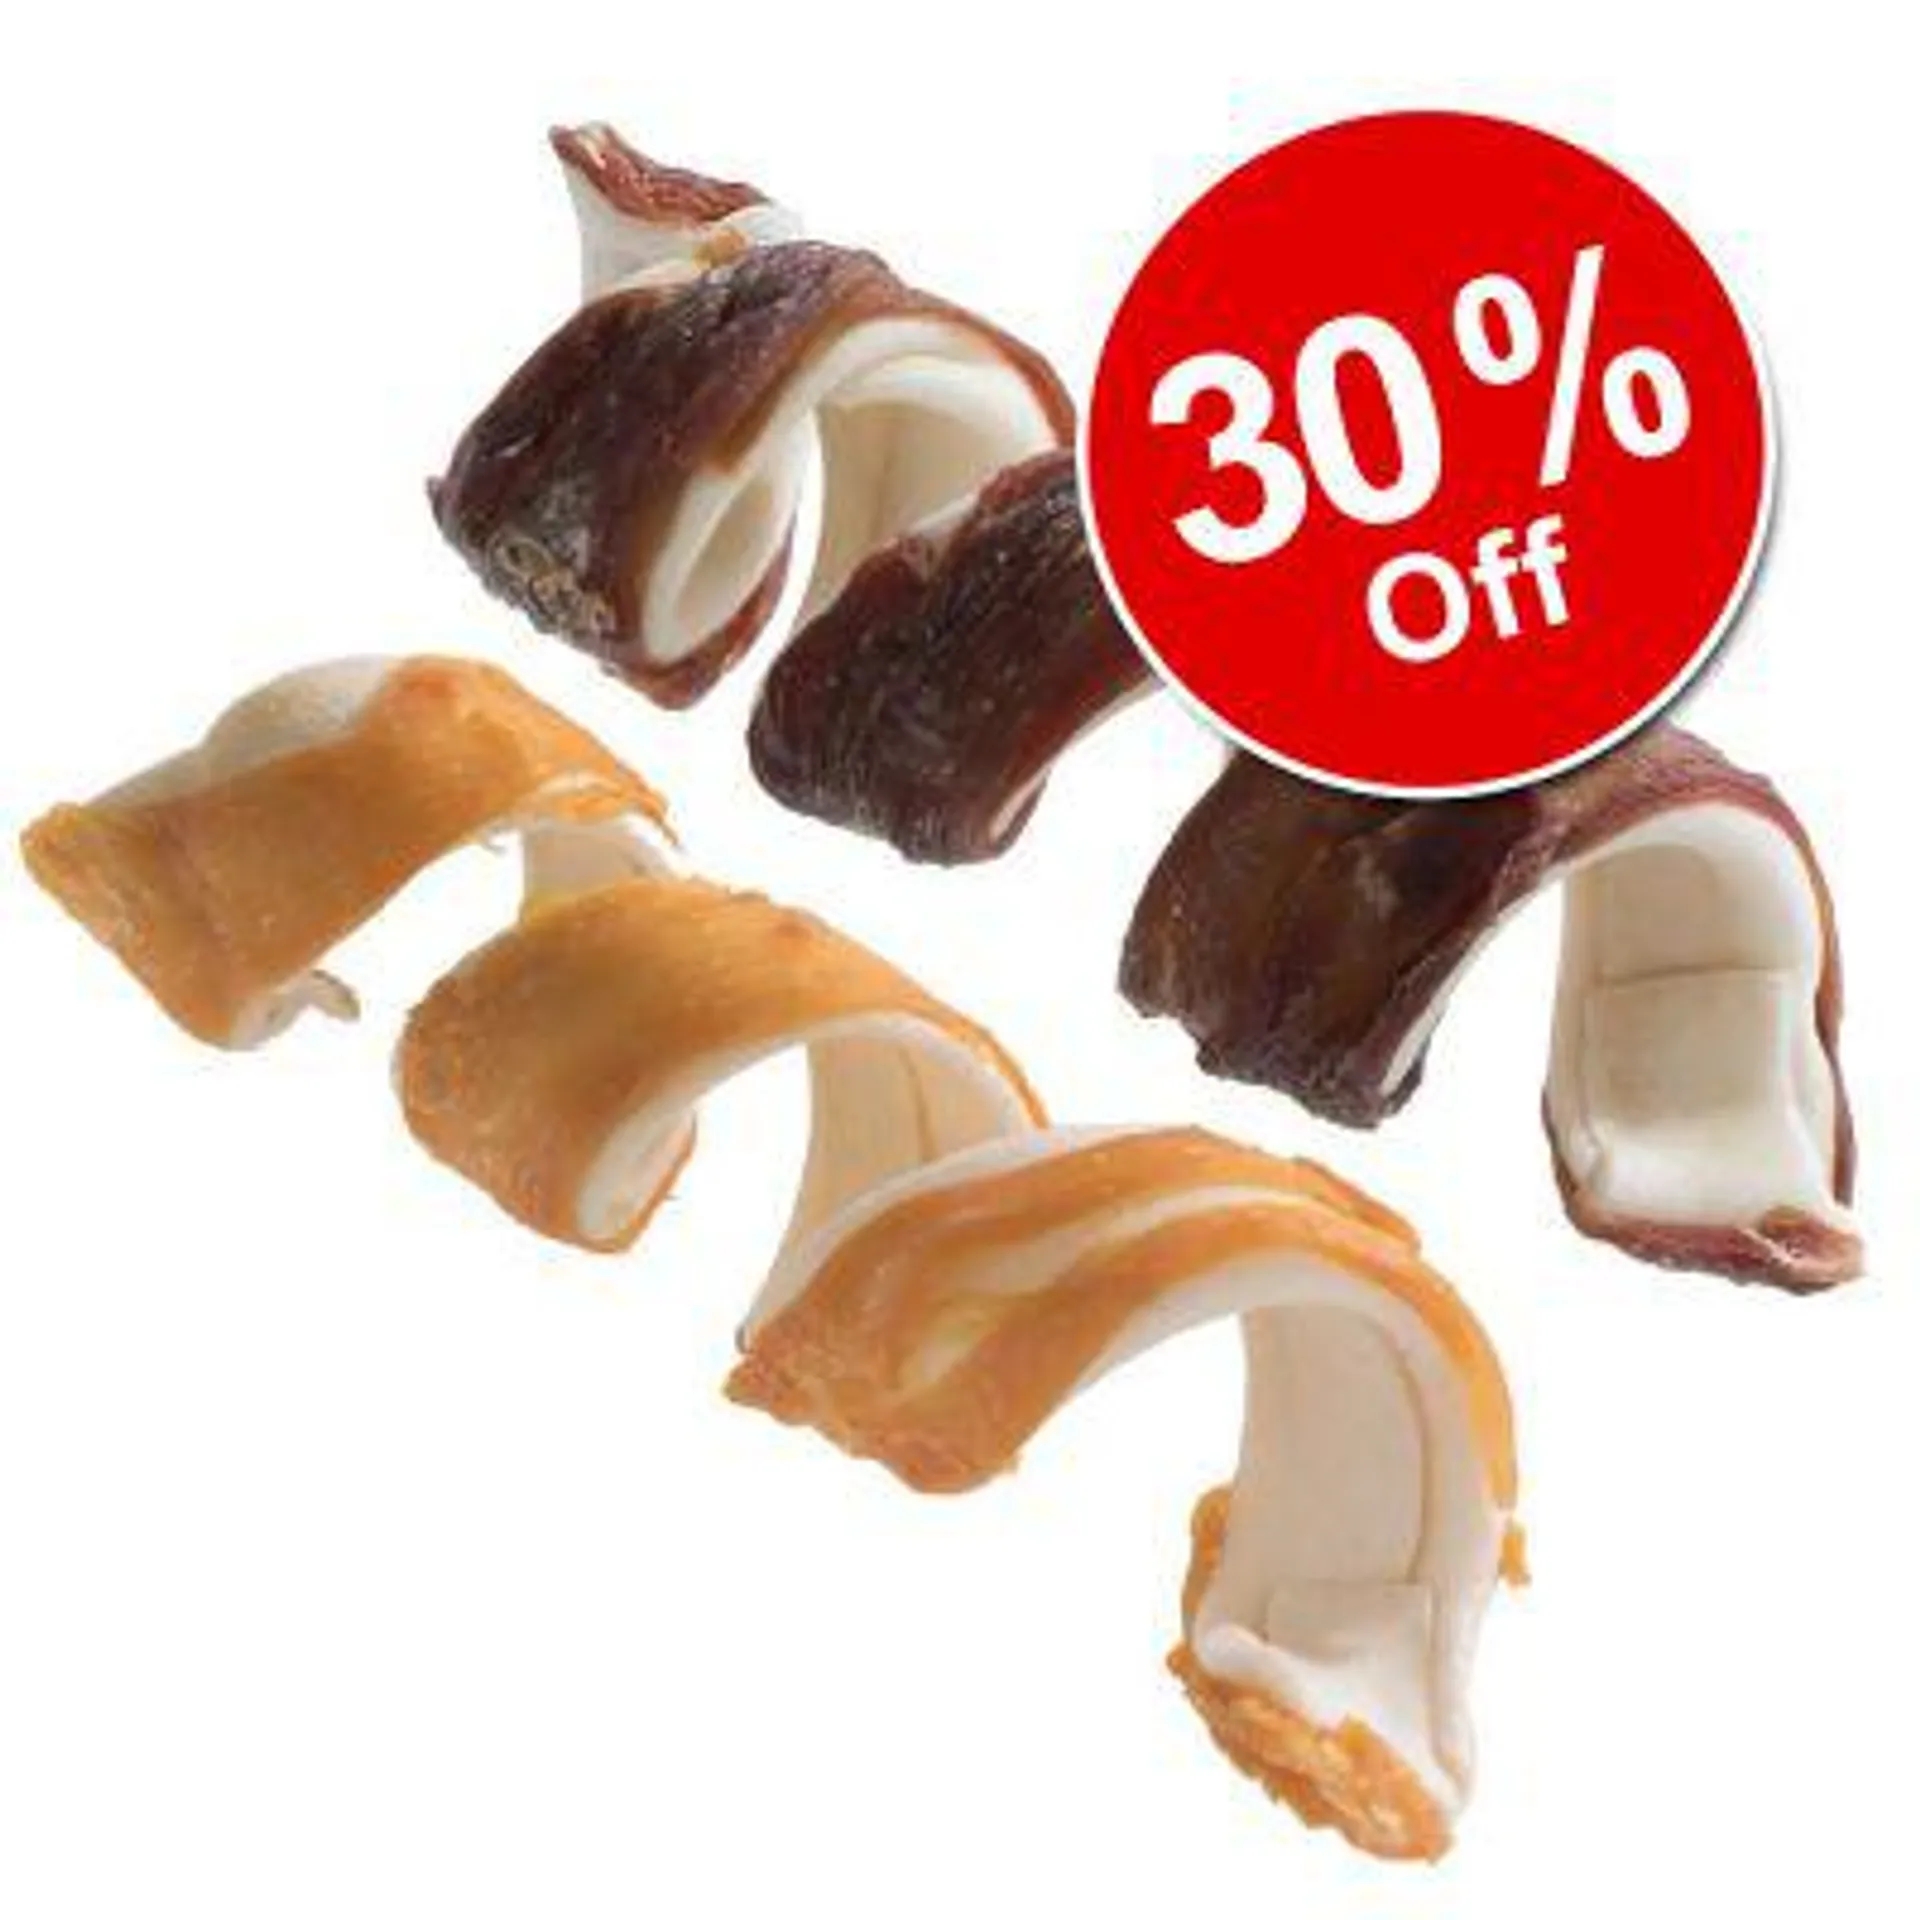 4 x 10cm Lukullus Spiral Dog Chews Mixed Trial Pack - 30% Off!*